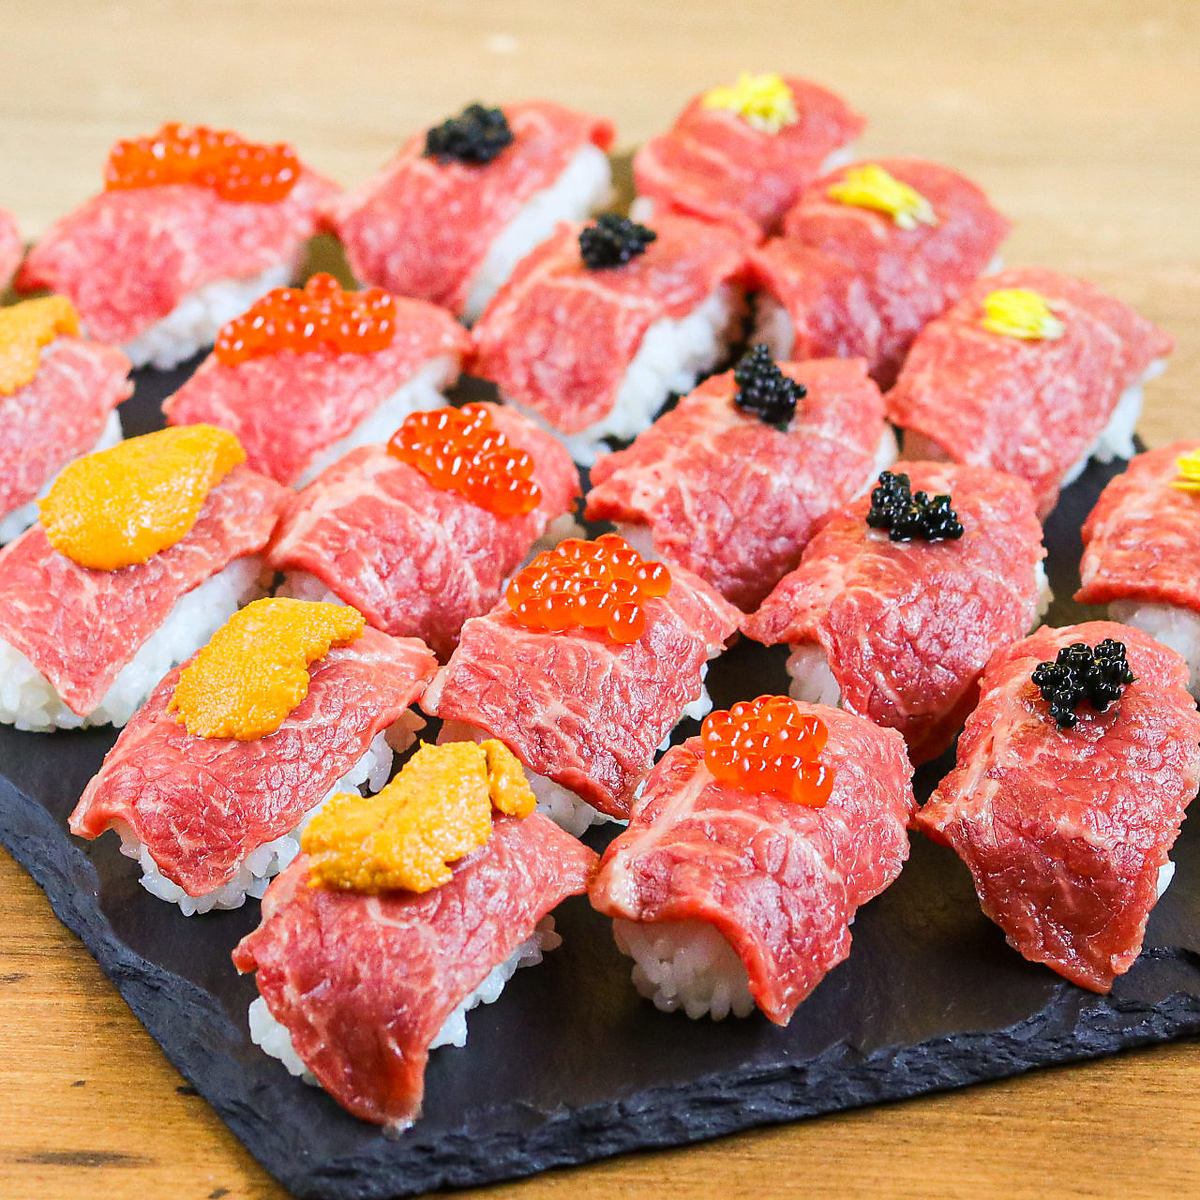 Seared sirloin meat sushi that is grilled right in front of you is popular! Luxurious toppings are also available!